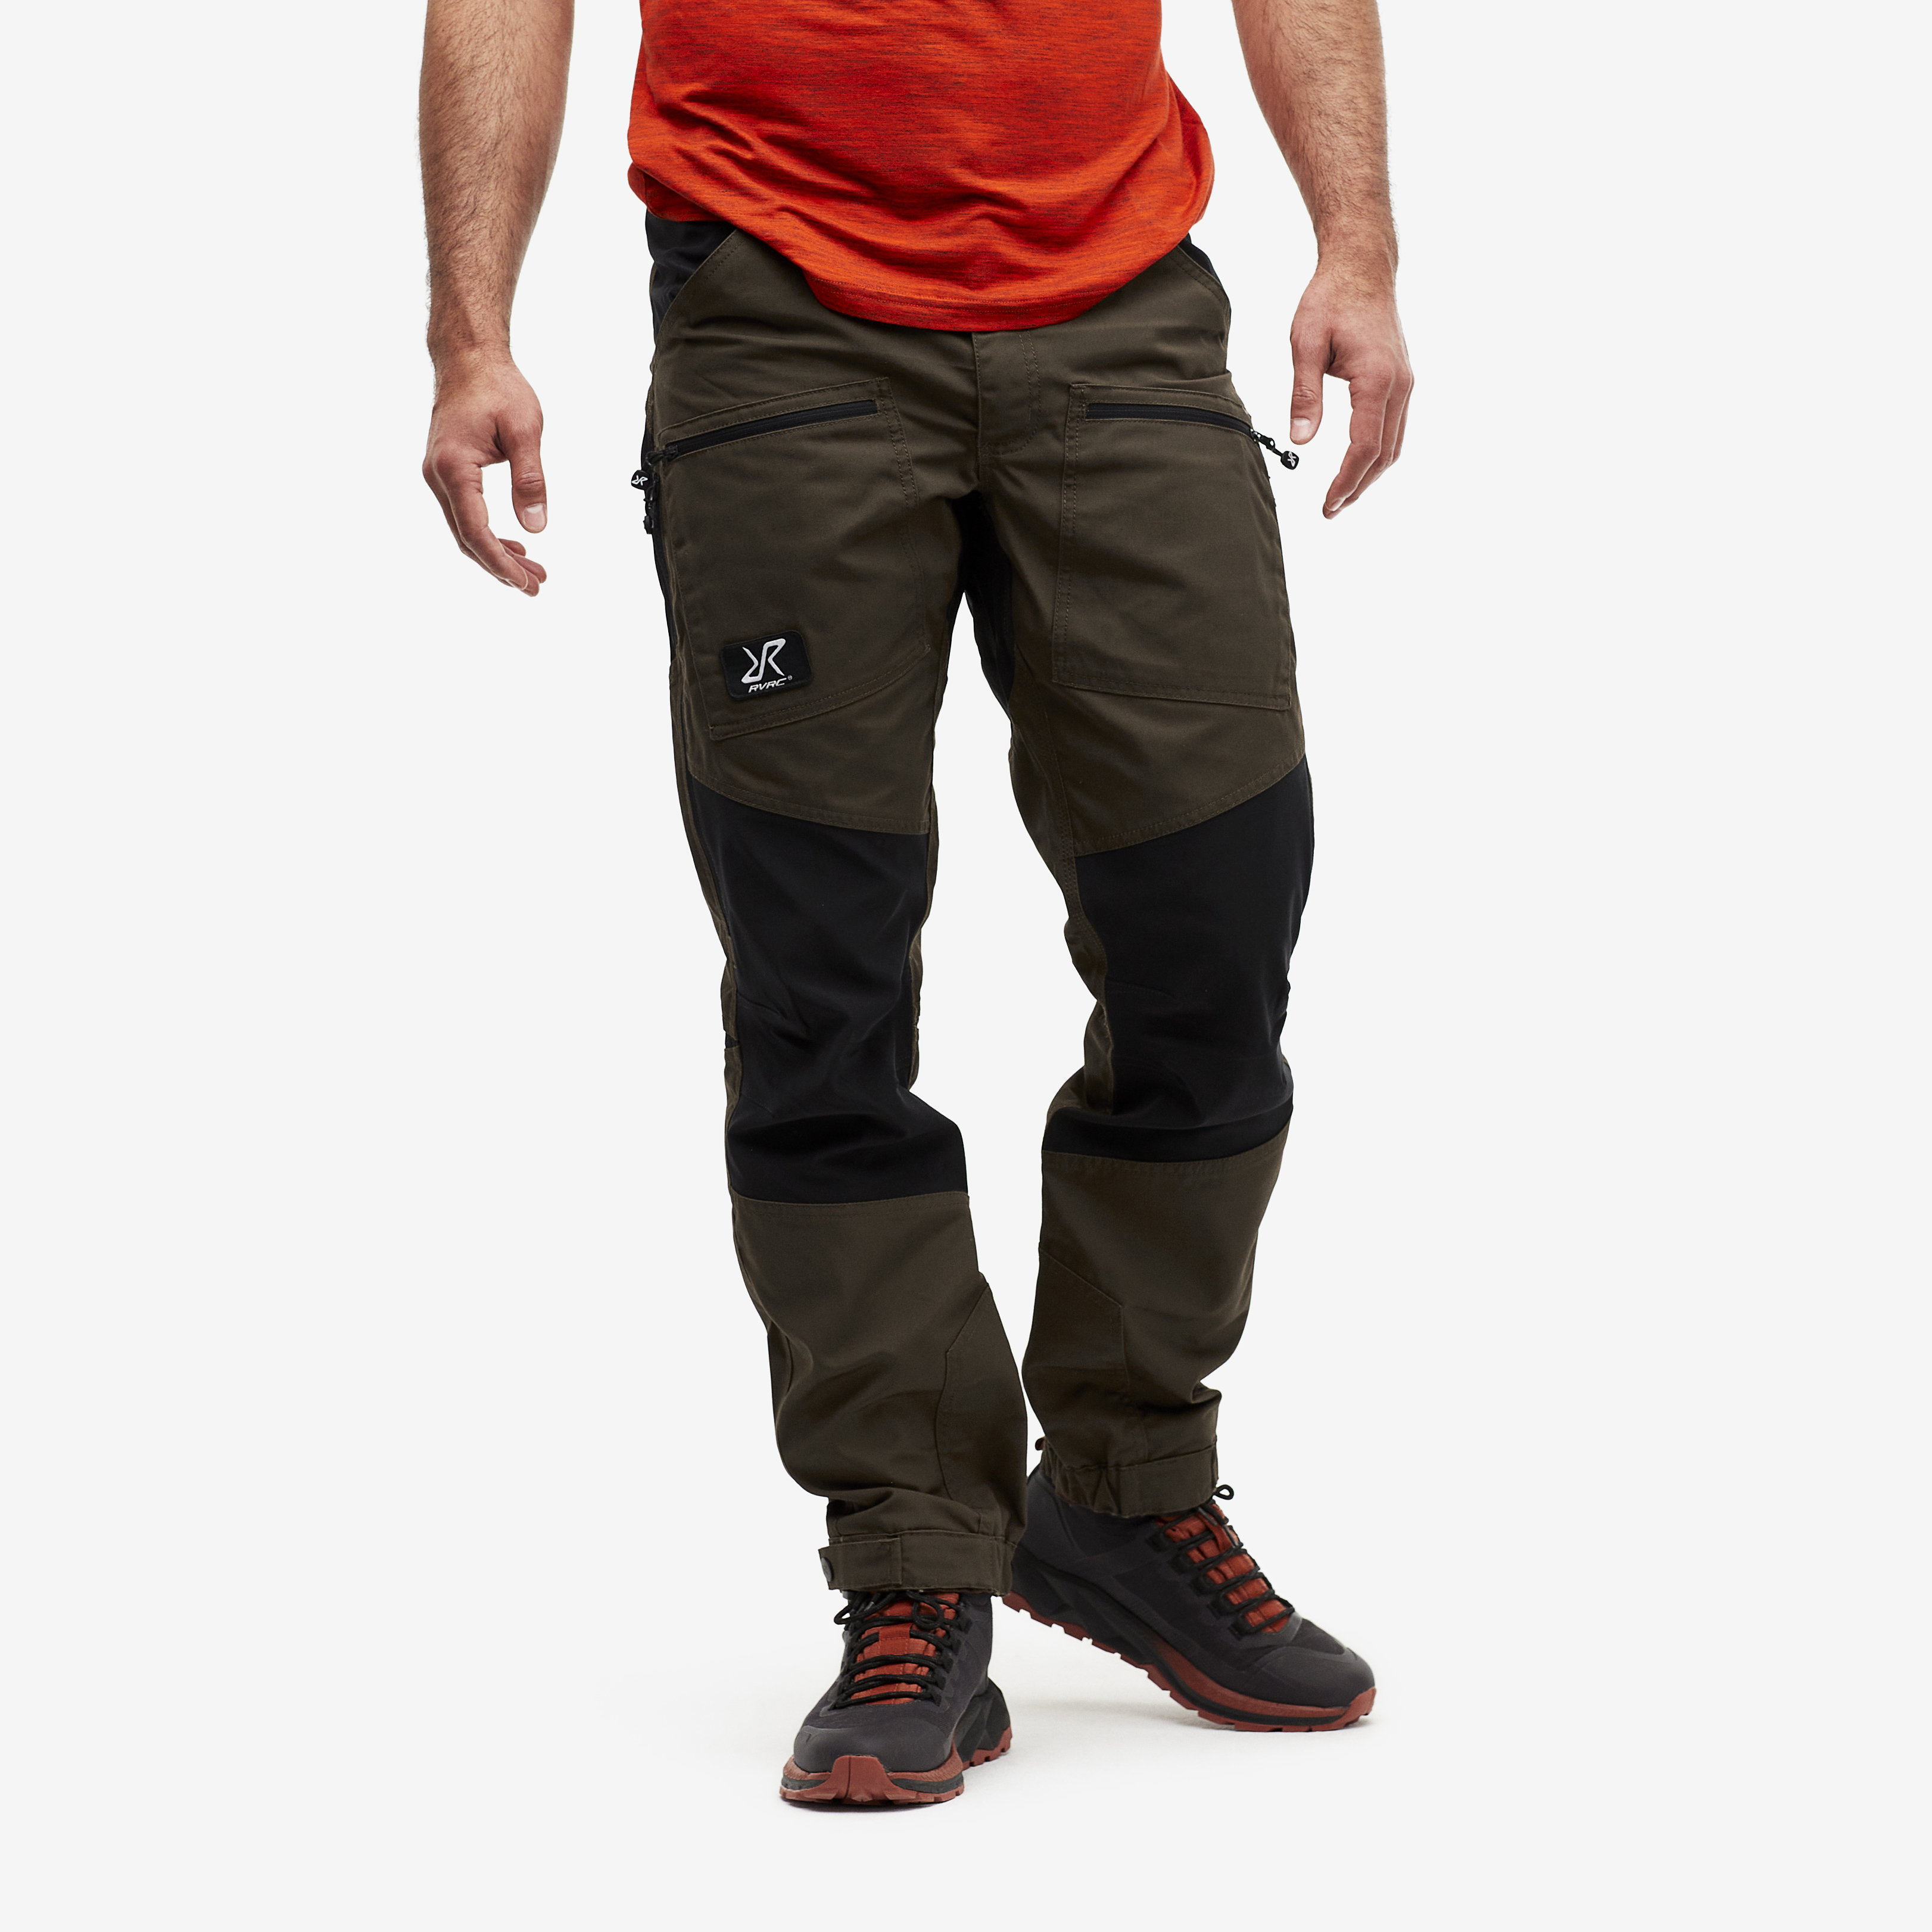 Nordwand Pro Short Pants Mud Homme